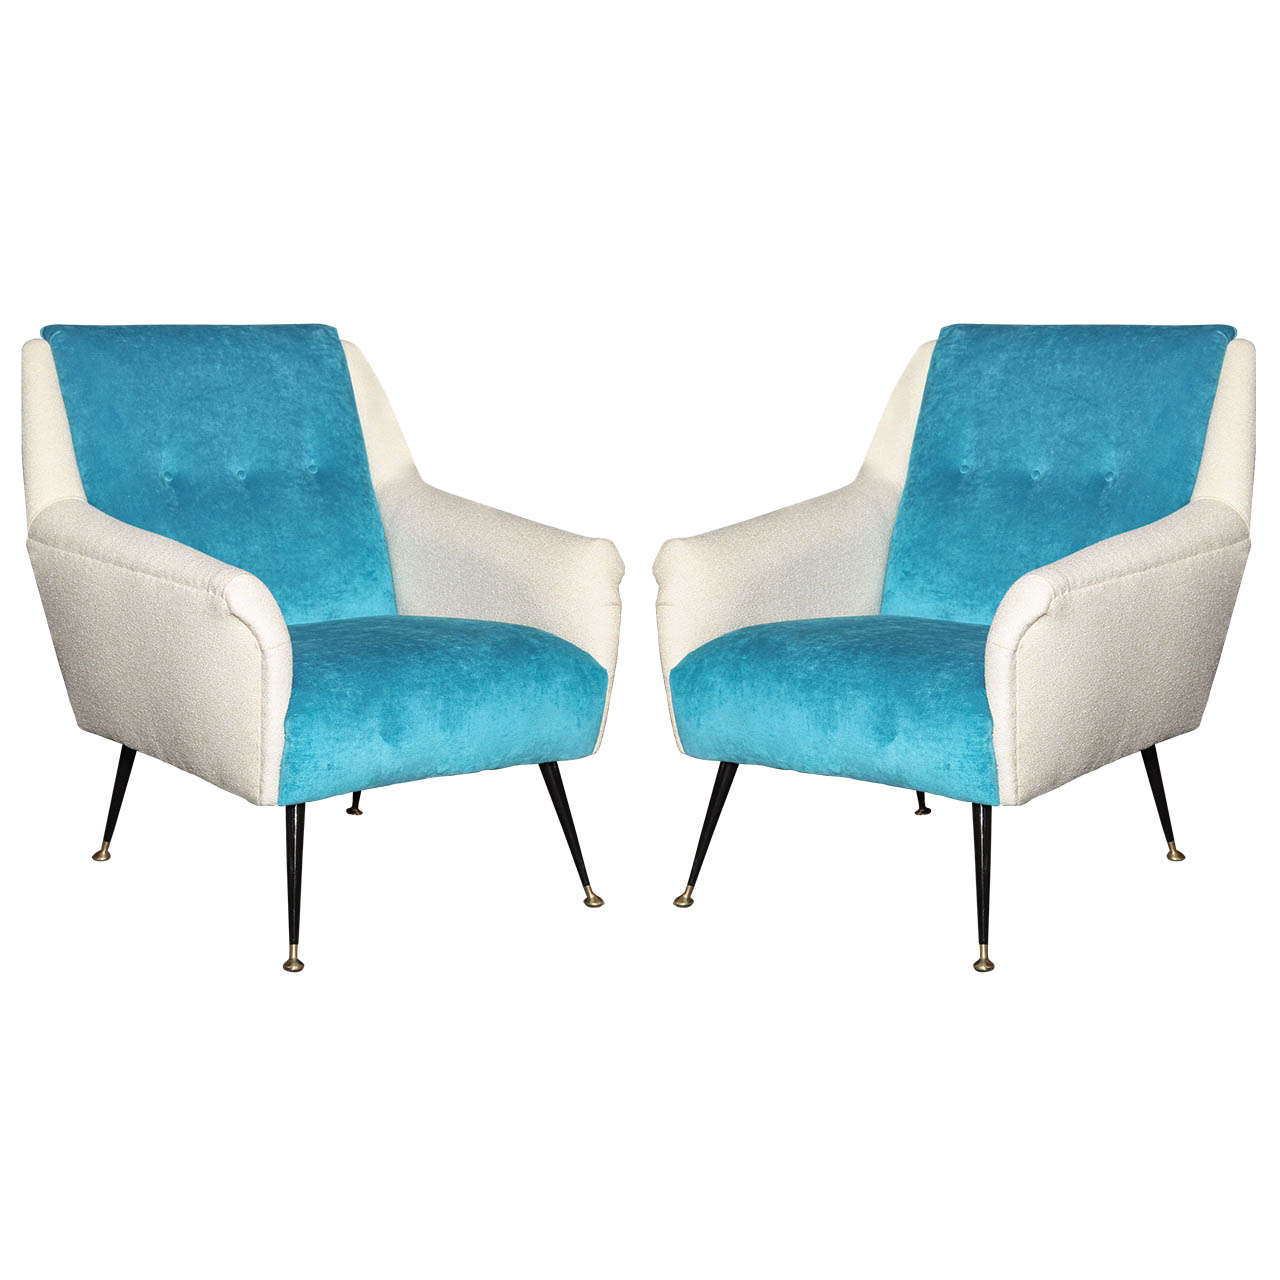 Pair of Armchairs by Gio Ponti Made in Milan, 1955 For Sale